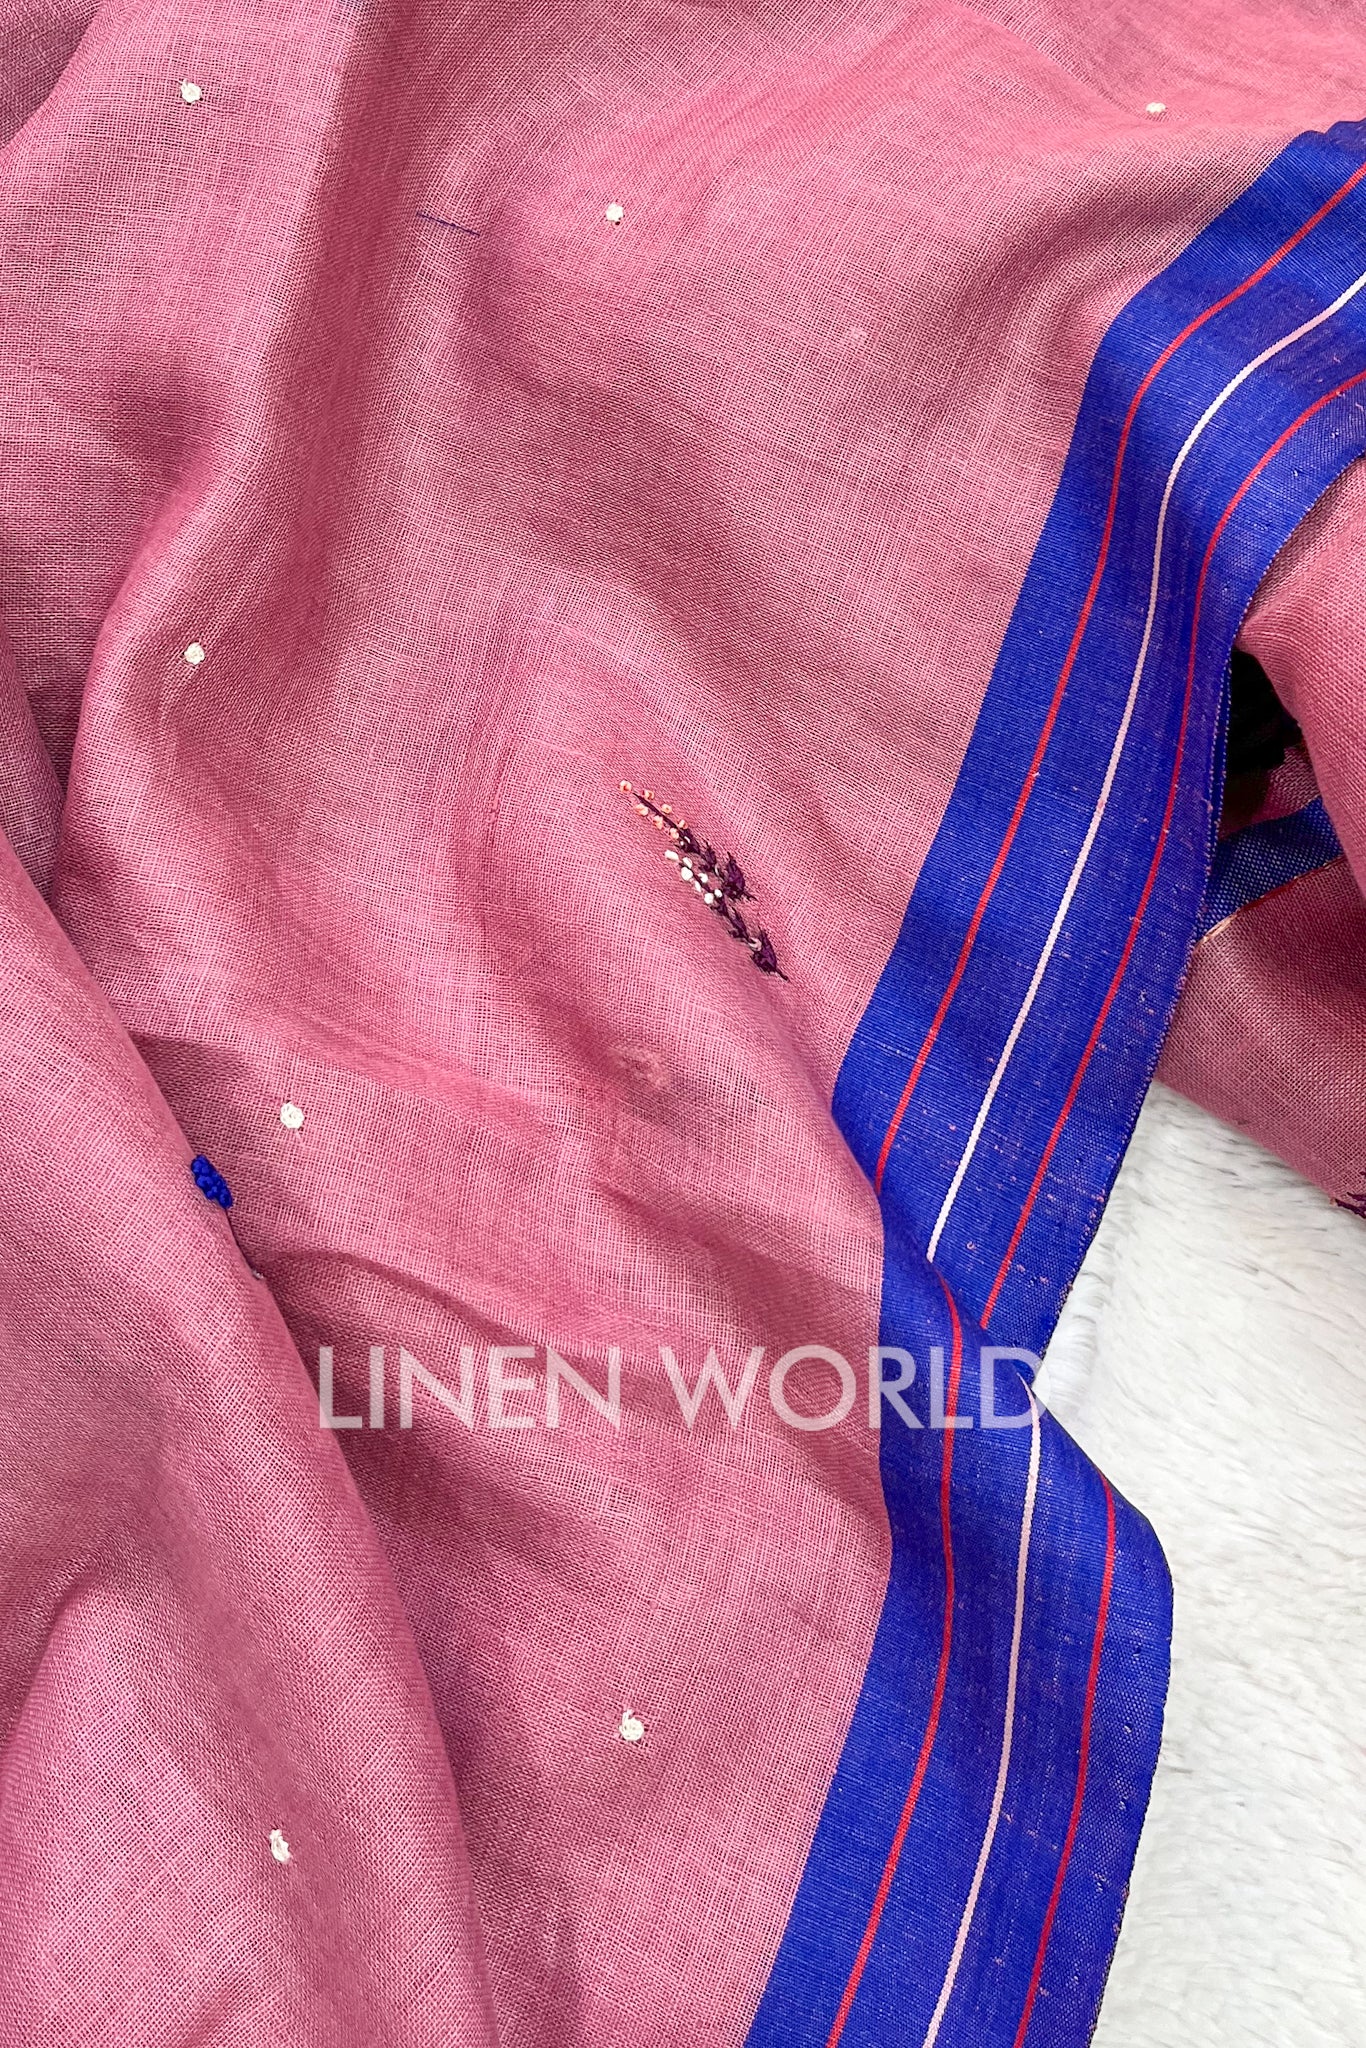 aafreen: french knot embroidered pink linen saree - linenworldonline.in